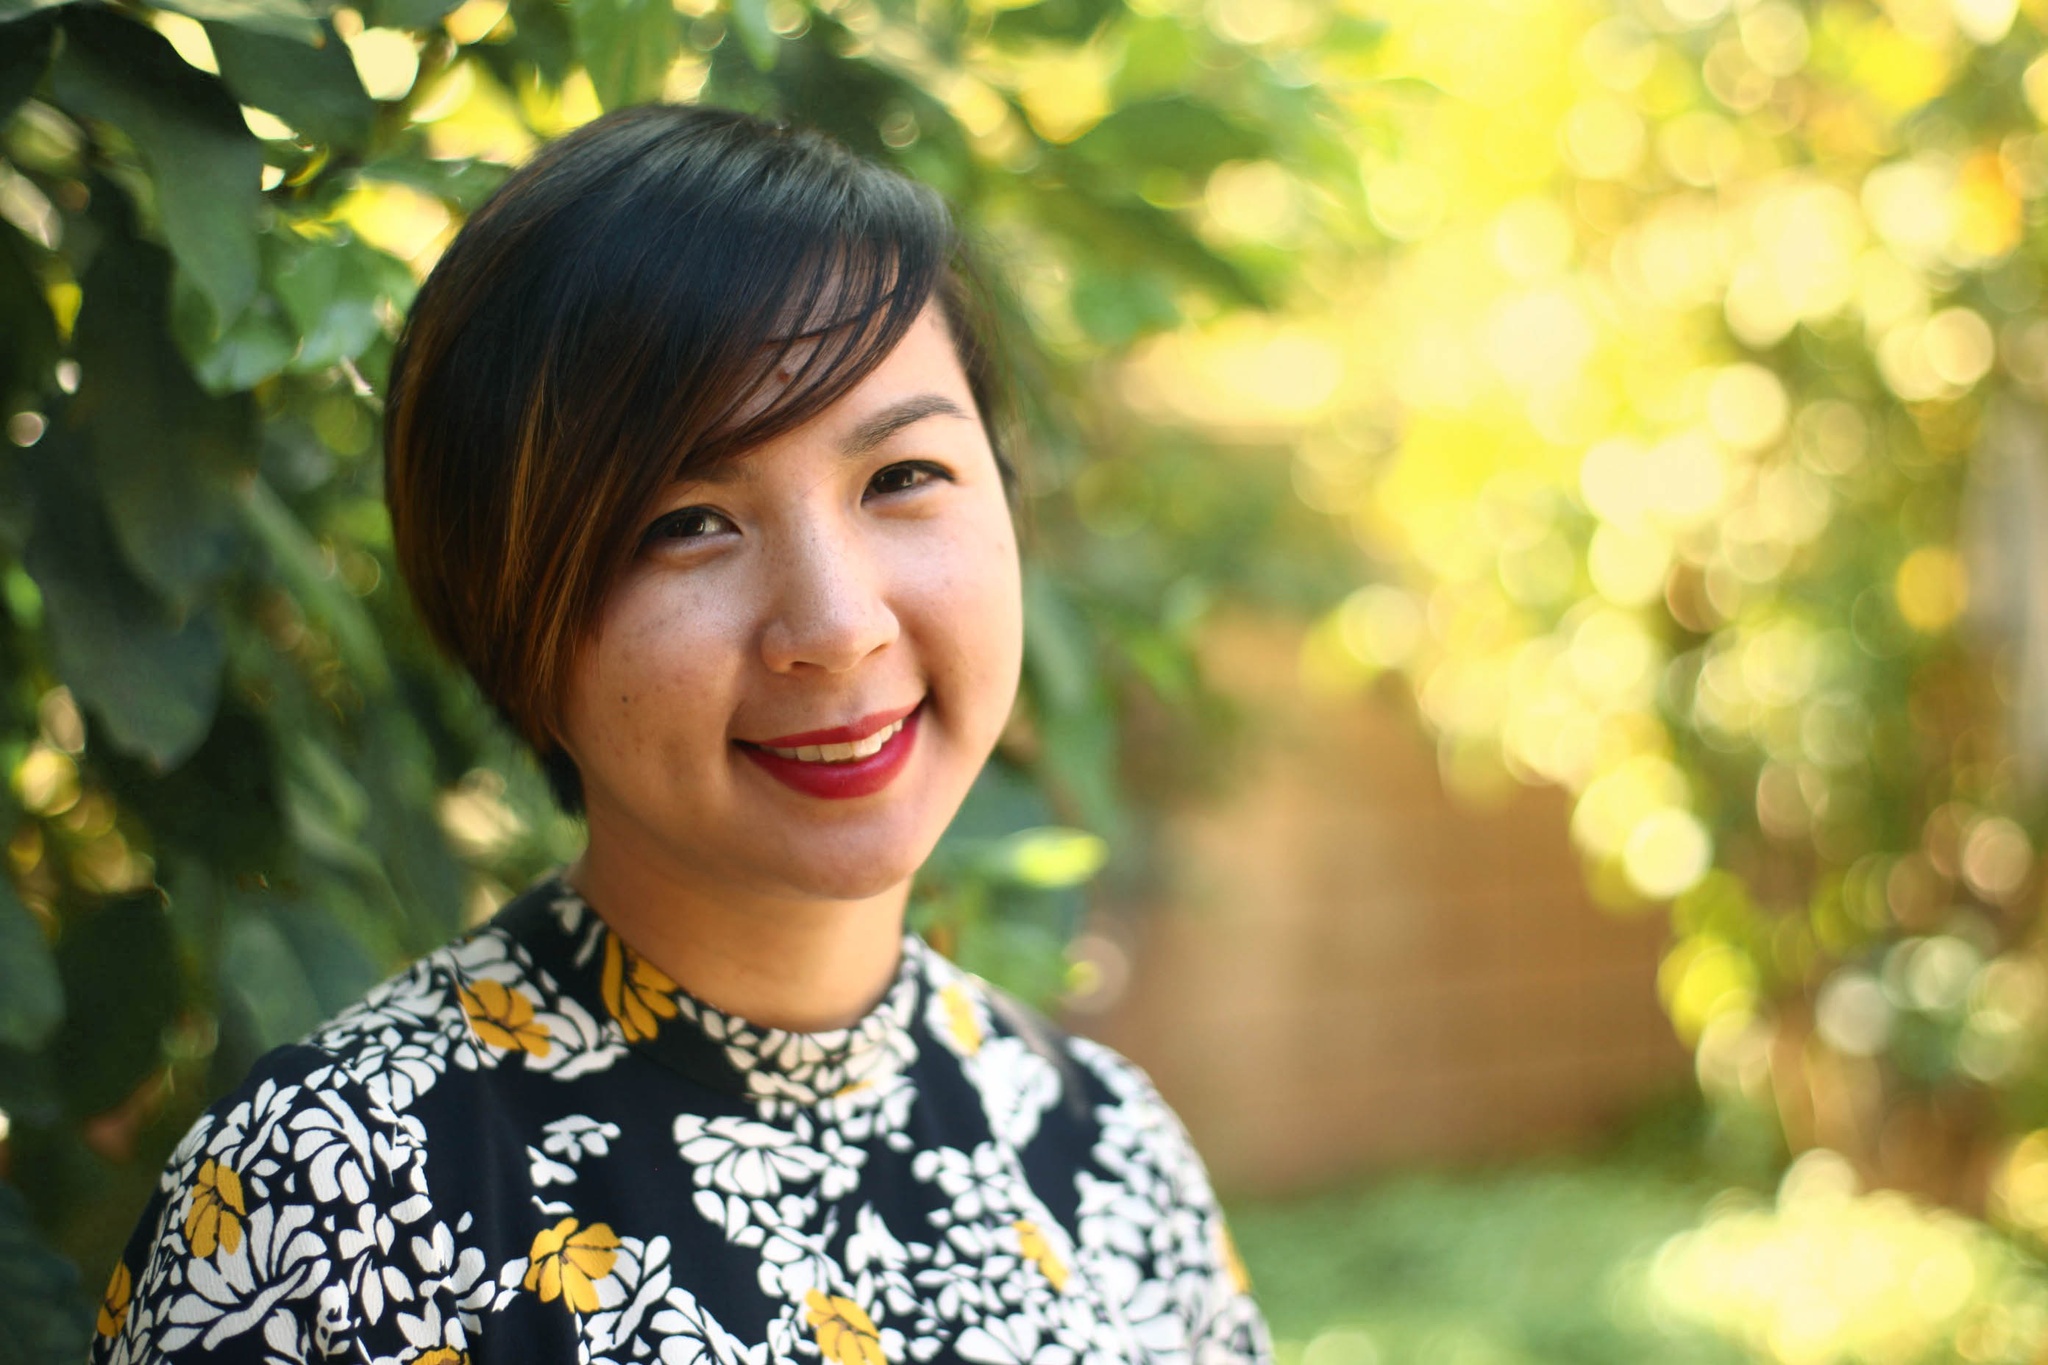 A headshot of Cathy Linh Che, a Vietnamese American woman who poses outside in sunlight with trees and bushes in the background. She has short brown hair swept across her forehead, wears red lipstick, and smiles at us. Photo by Jess X. Snow